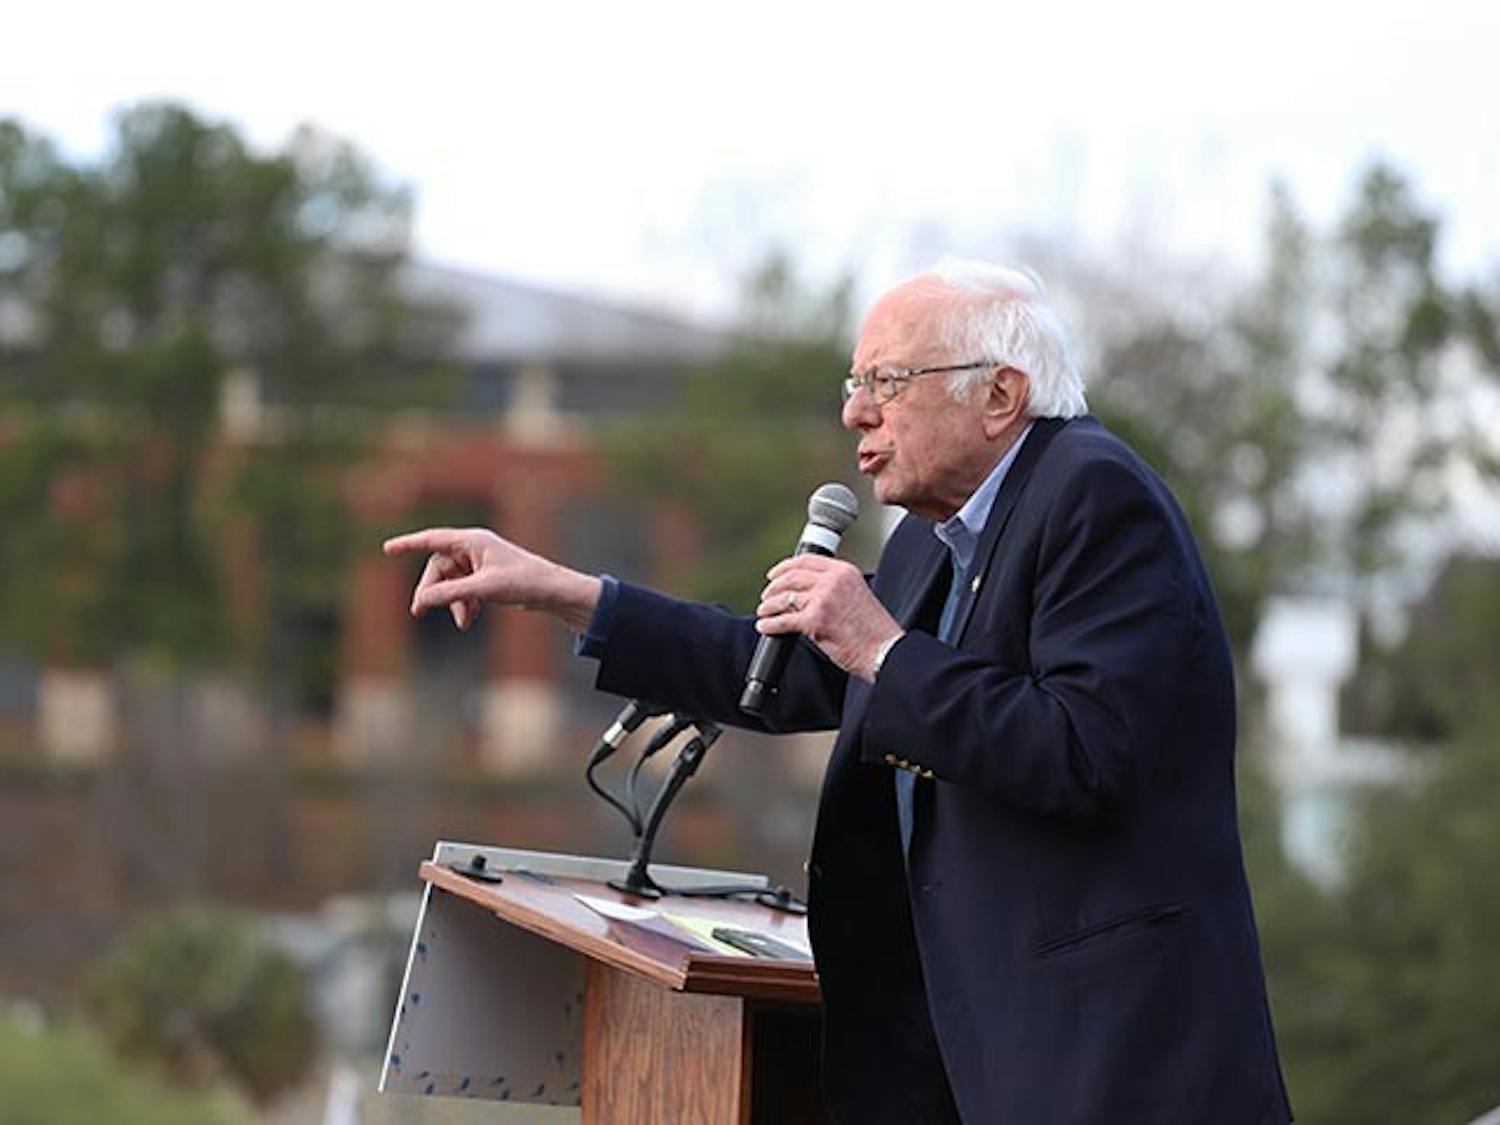 Senator Bernie Sanders speaking at a campaign rally in Columbia, South Carolina, ahead of primary on Feb. 28. He emphasized that reversing economic inequality is one of his proposed policies.